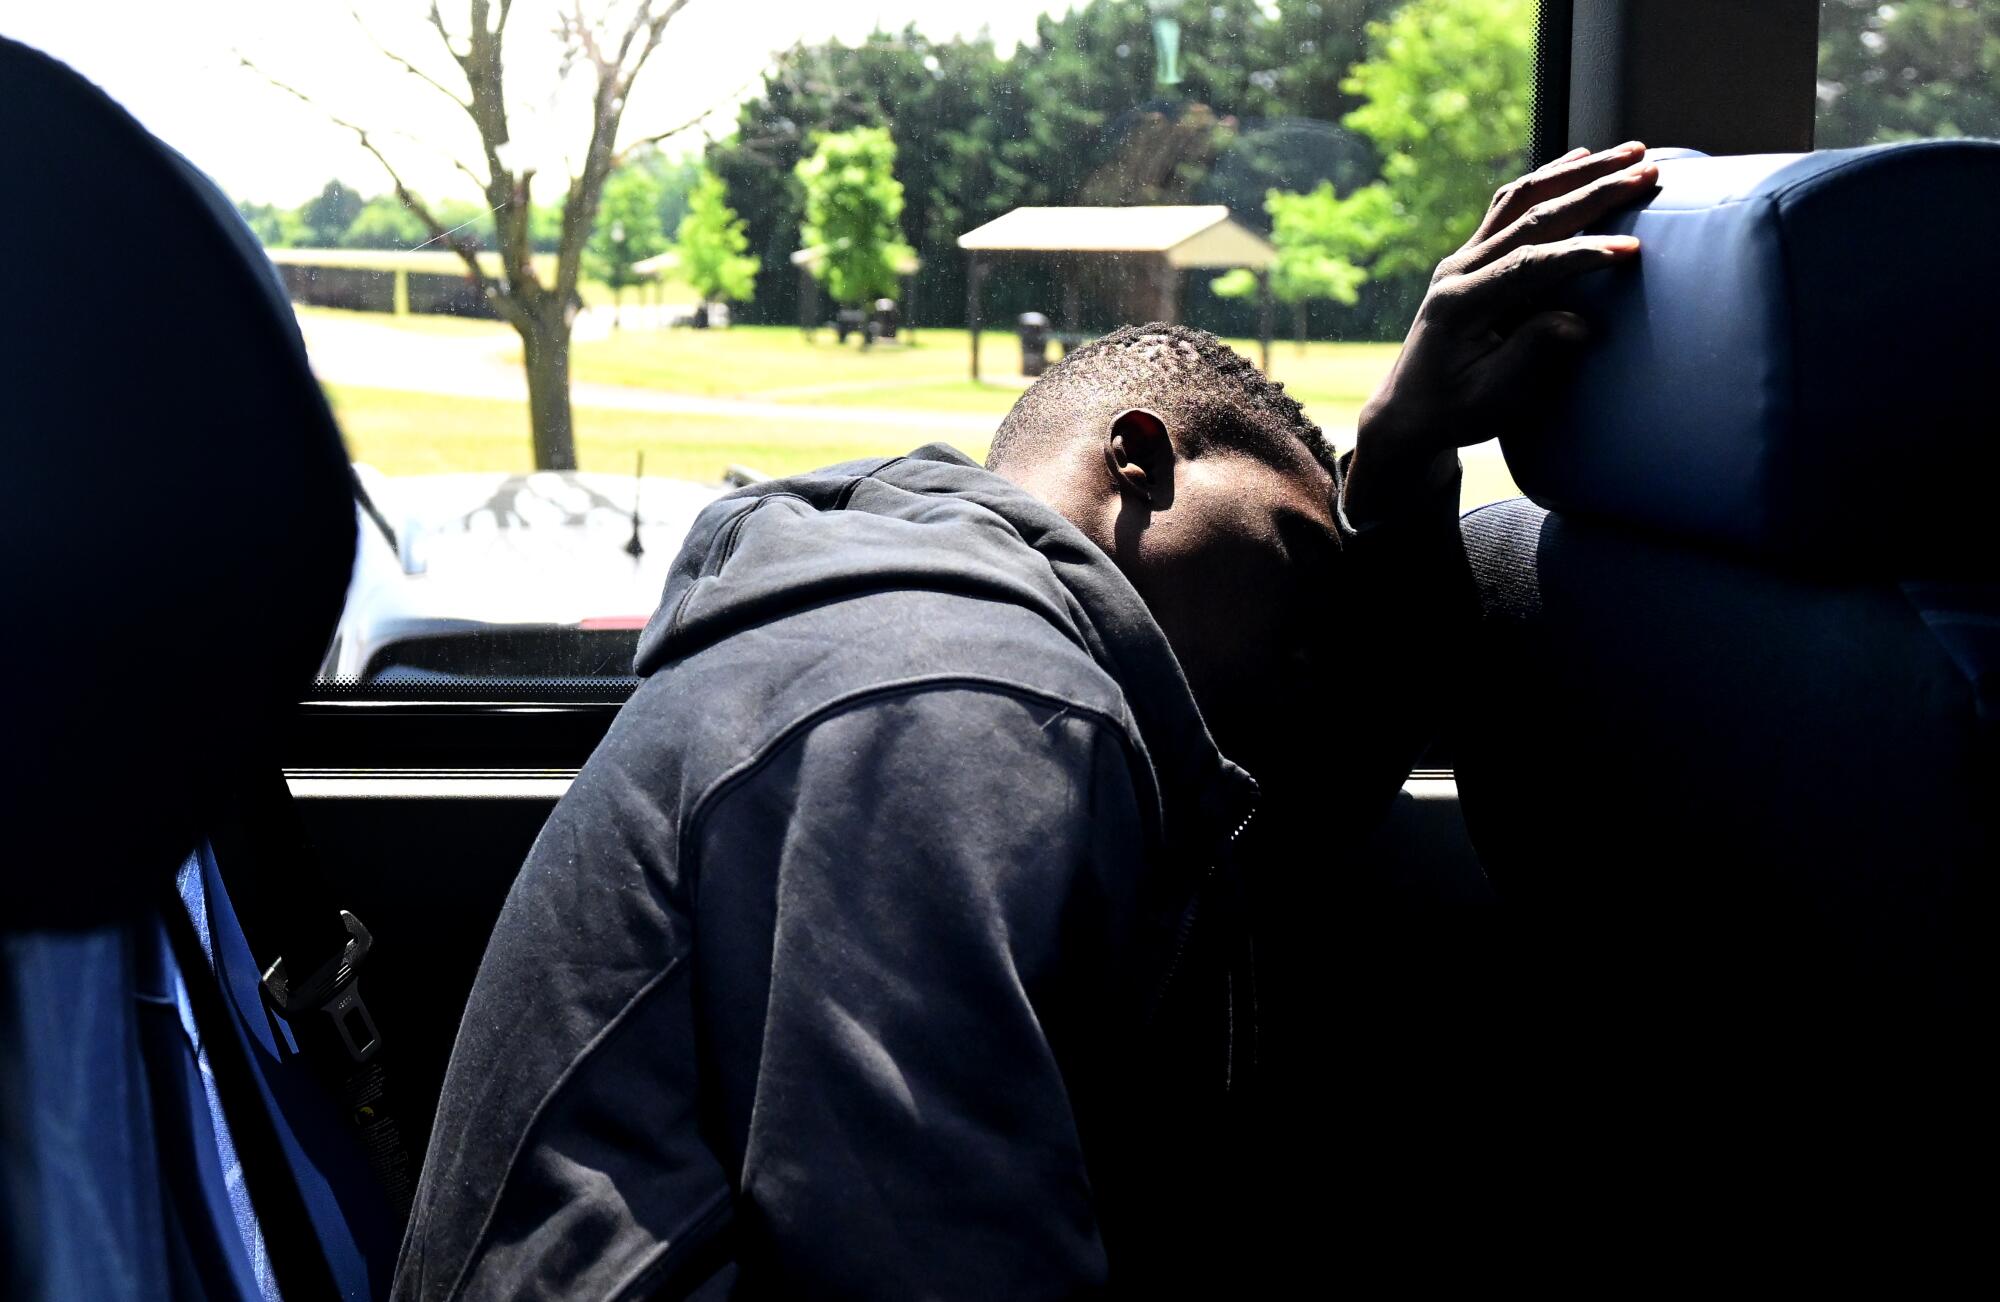 A jet-lagged Dennis Kasumba tries to sleep on a bus in Frederick, Md., headed to Trenton, N.J.